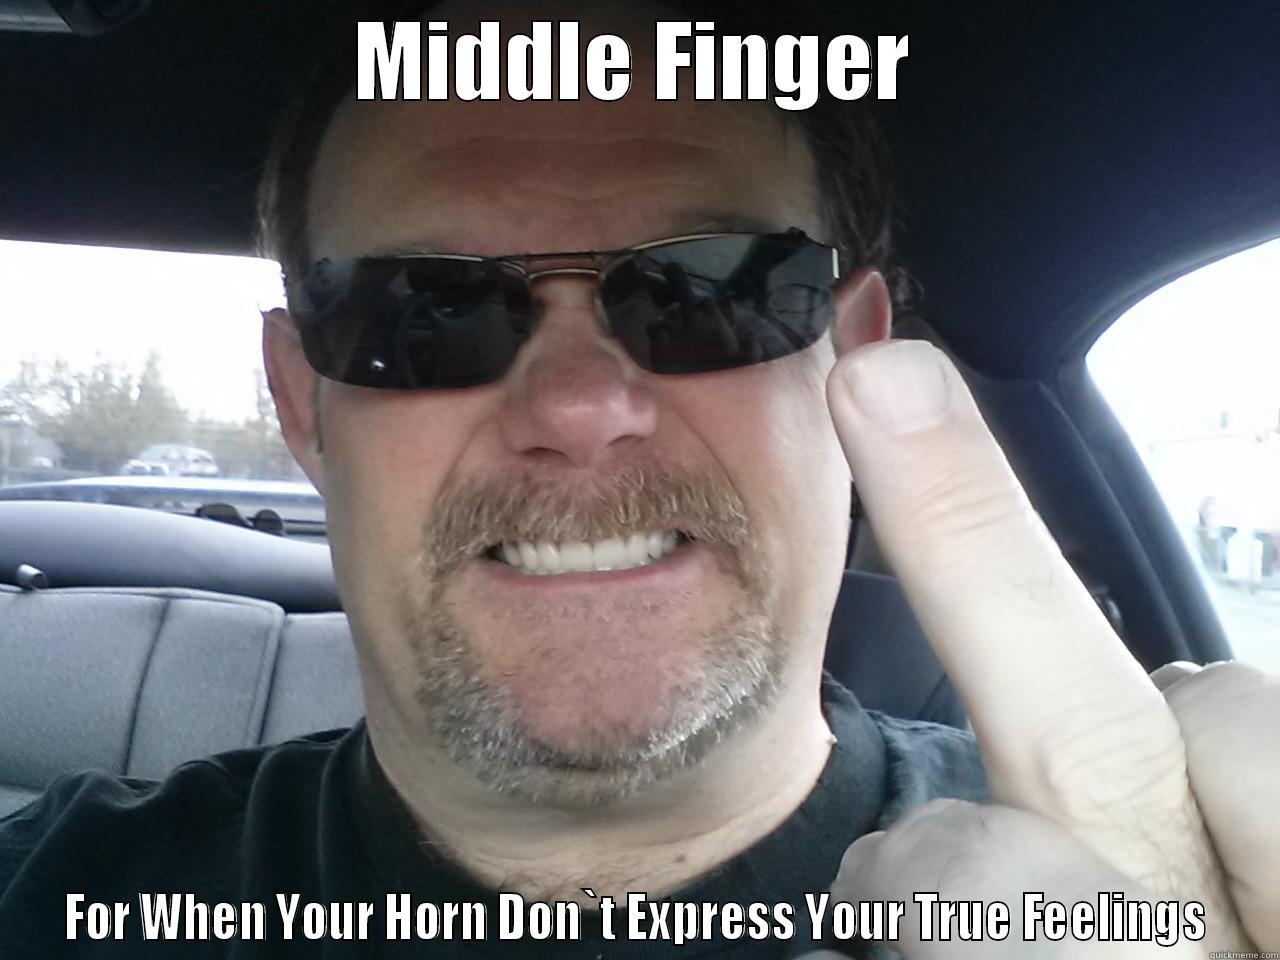 MIDDLE FINGER FOR WHEN YOUR HORN DON`T EXPRESS YOUR TRUE FEELINGS Misc